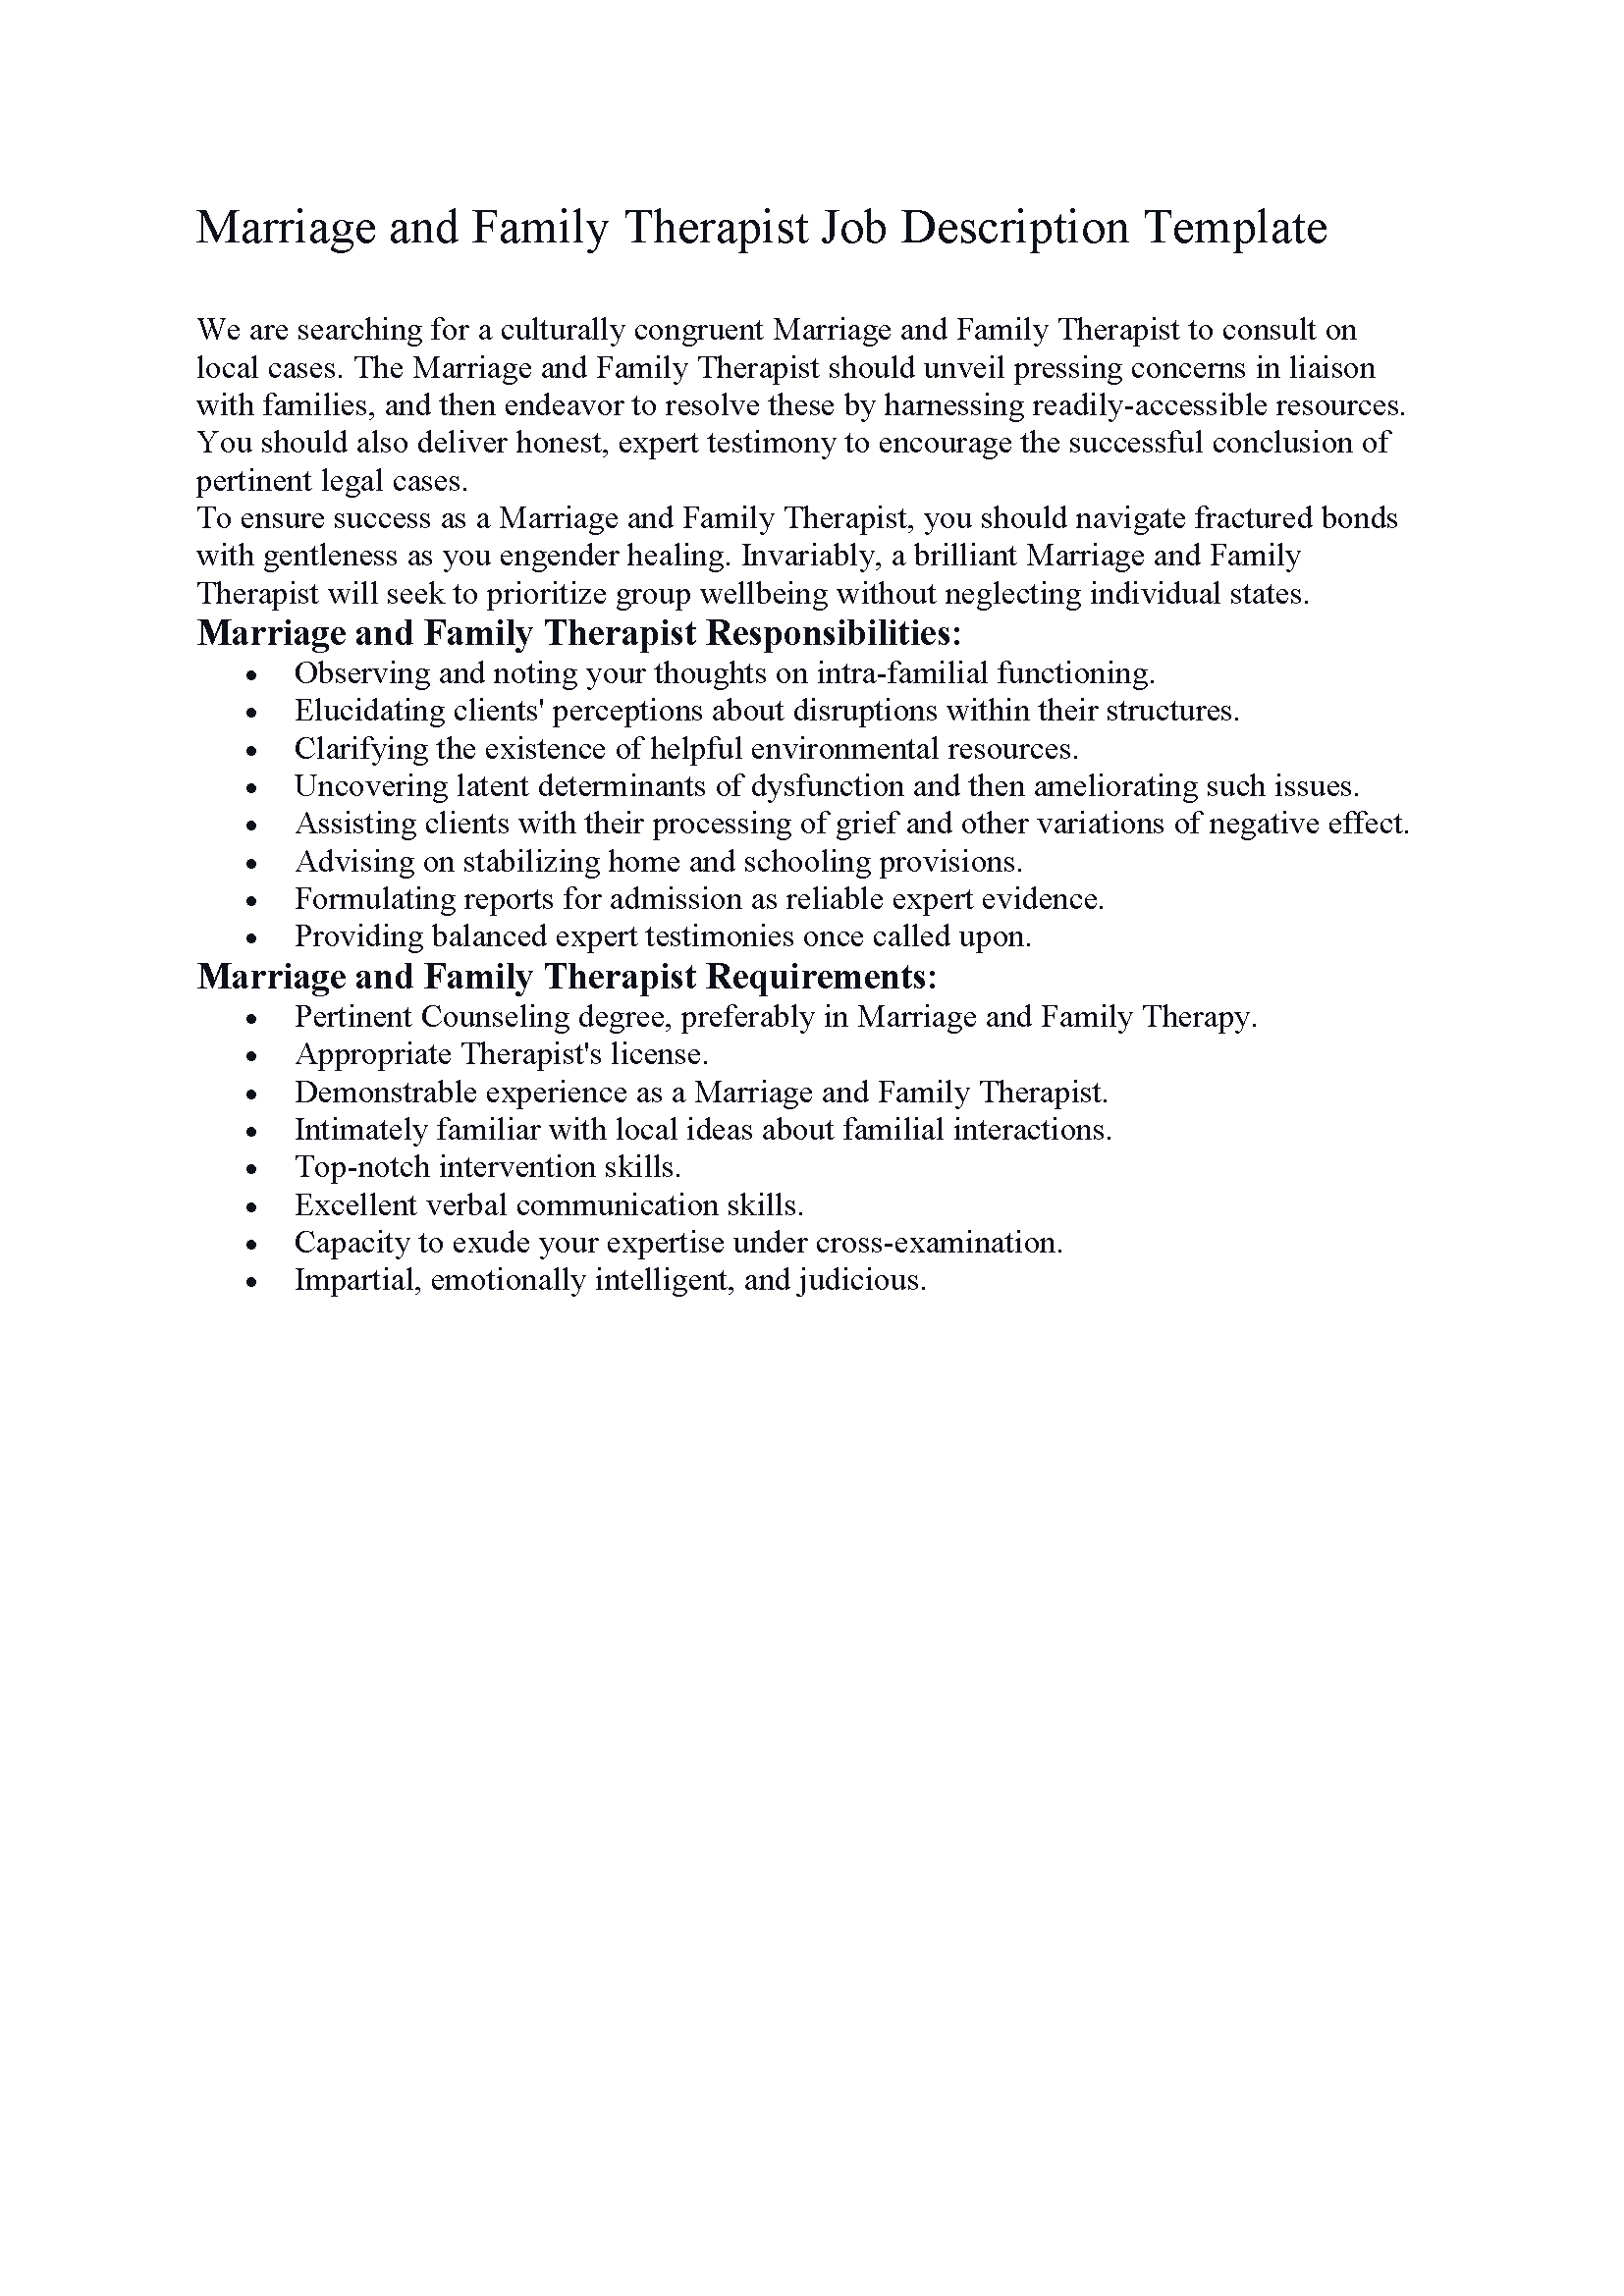 Marriage and Family Therapist Job Description Template